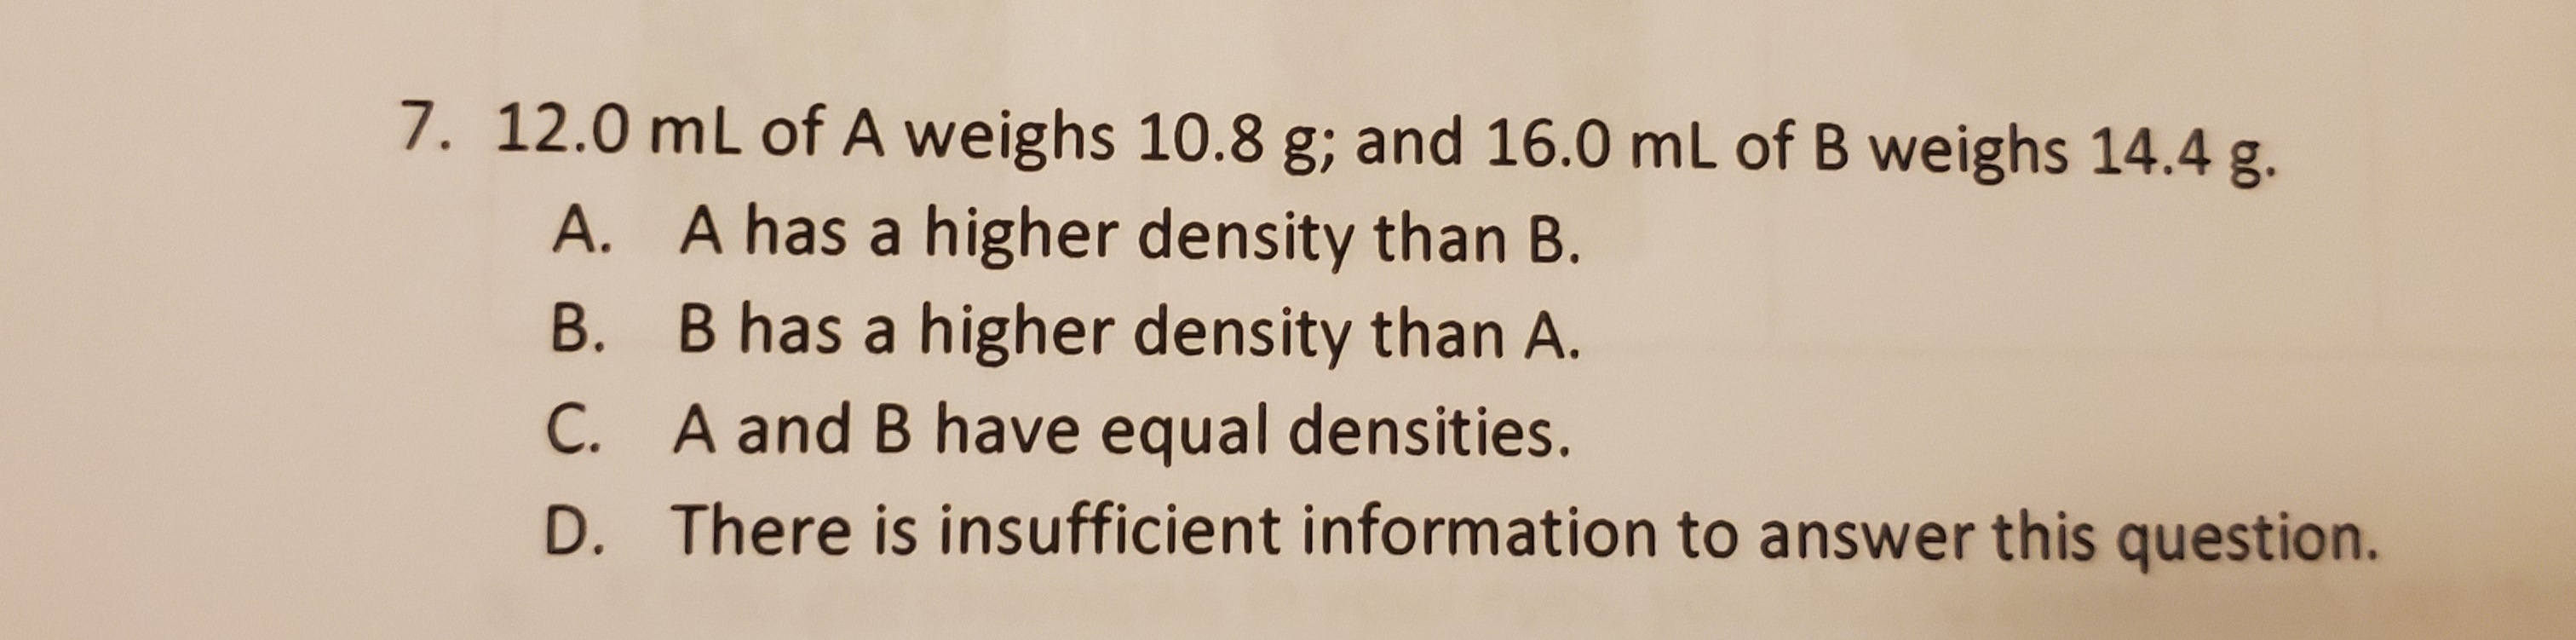 7. 12.0 mL of A weighs 10.8 g; and 16.0 mL of B weighs 14.4 g.
A. A has a higher density than B.
B. B has a higher density than A.
C. A and B have equal densities.
D. There is insufficient information to answer this question.
